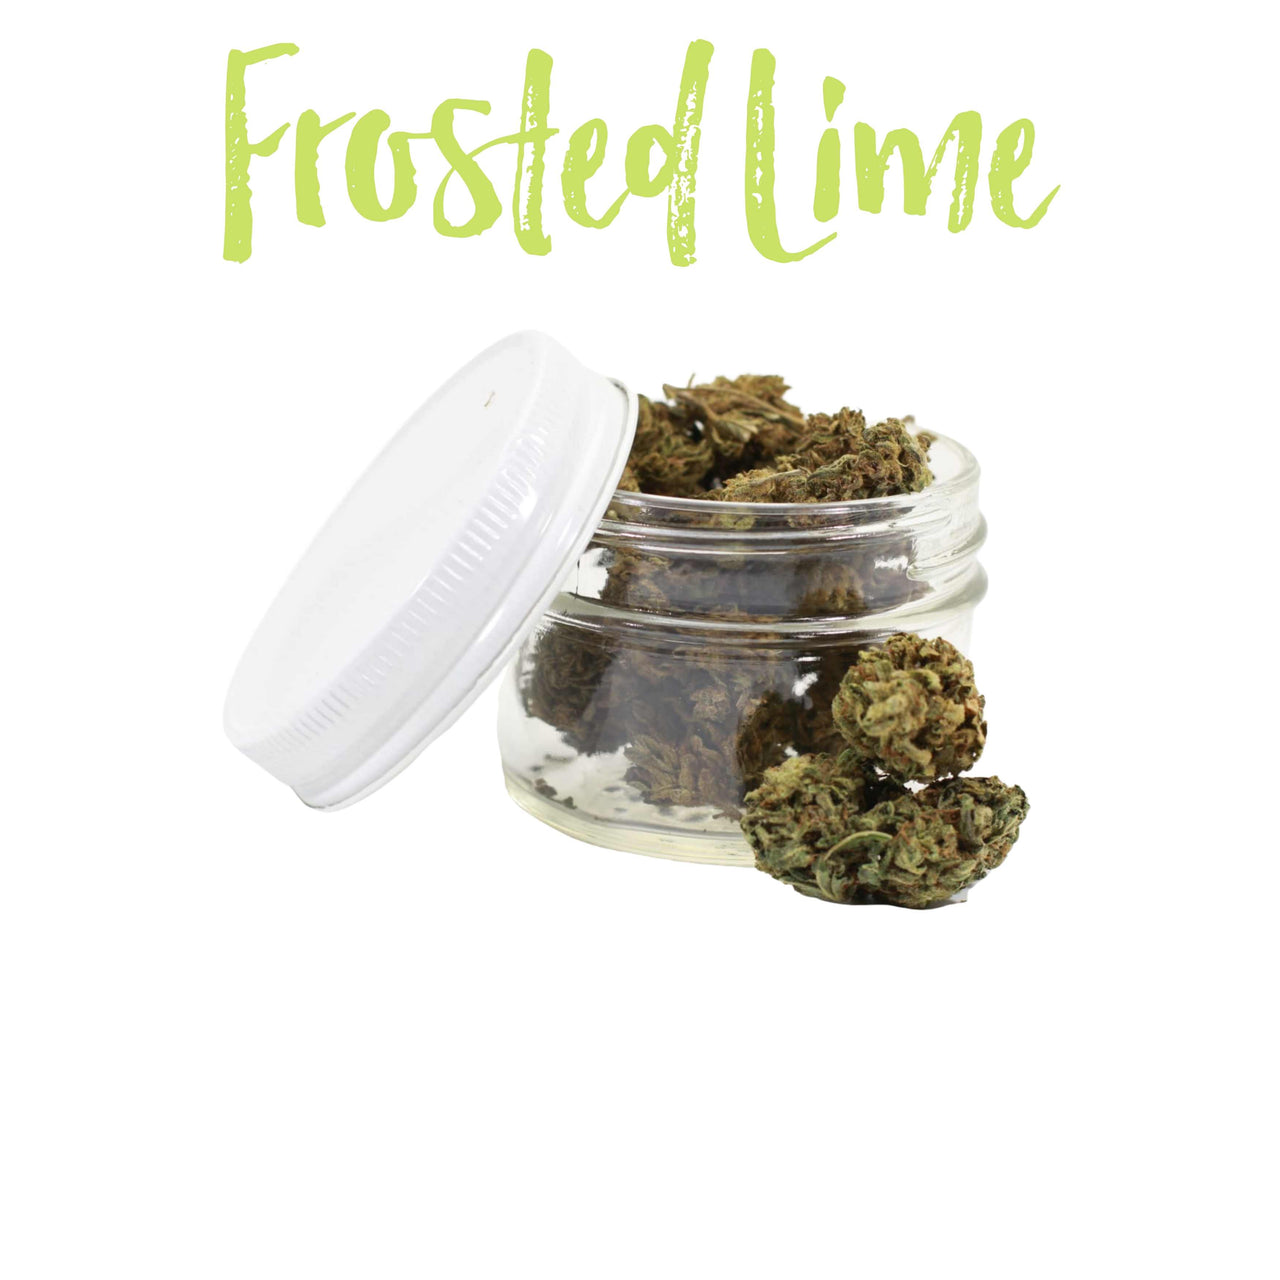 Frosted Lime Hemp Flower 3.5g